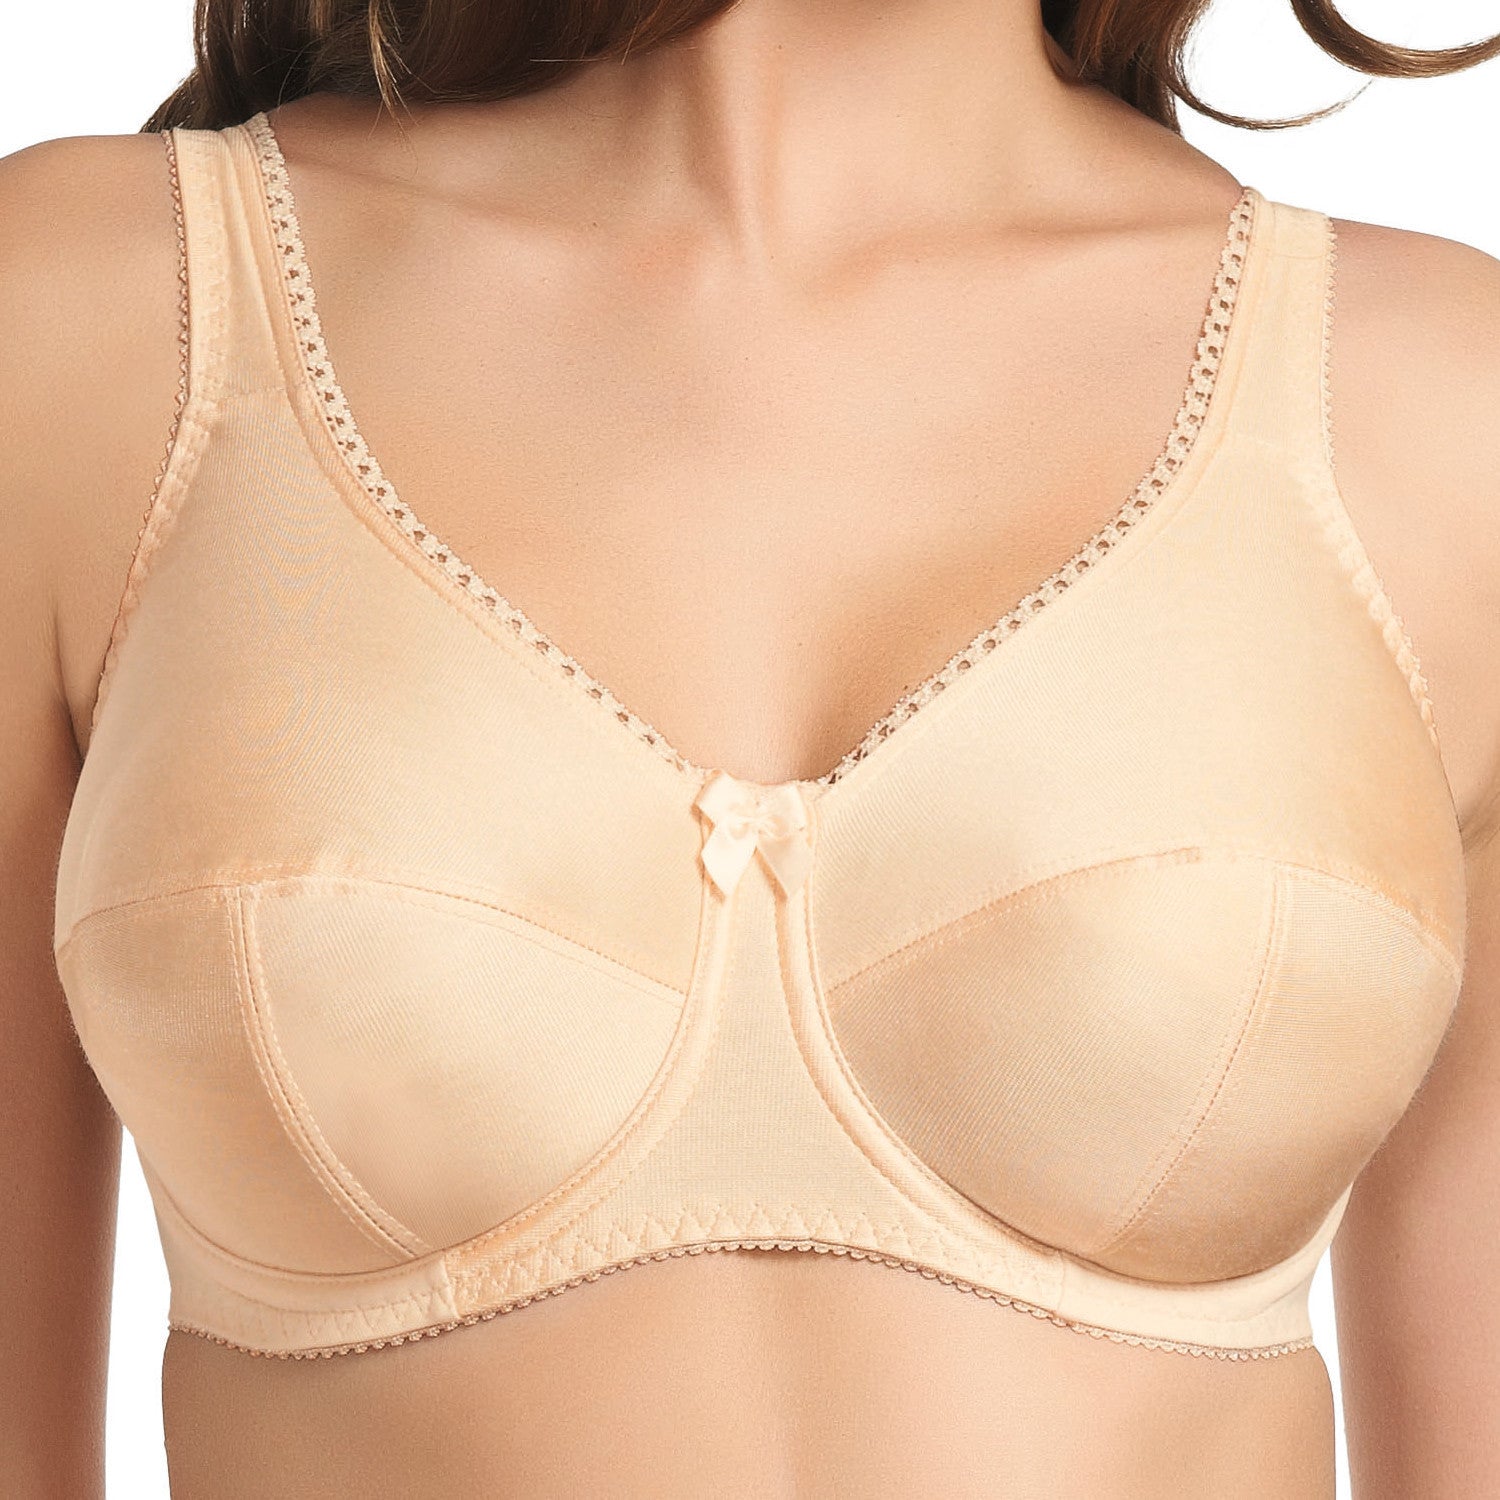 30GG Bras  Buy Size 30GG Bras at Betty and Belle Lingerie